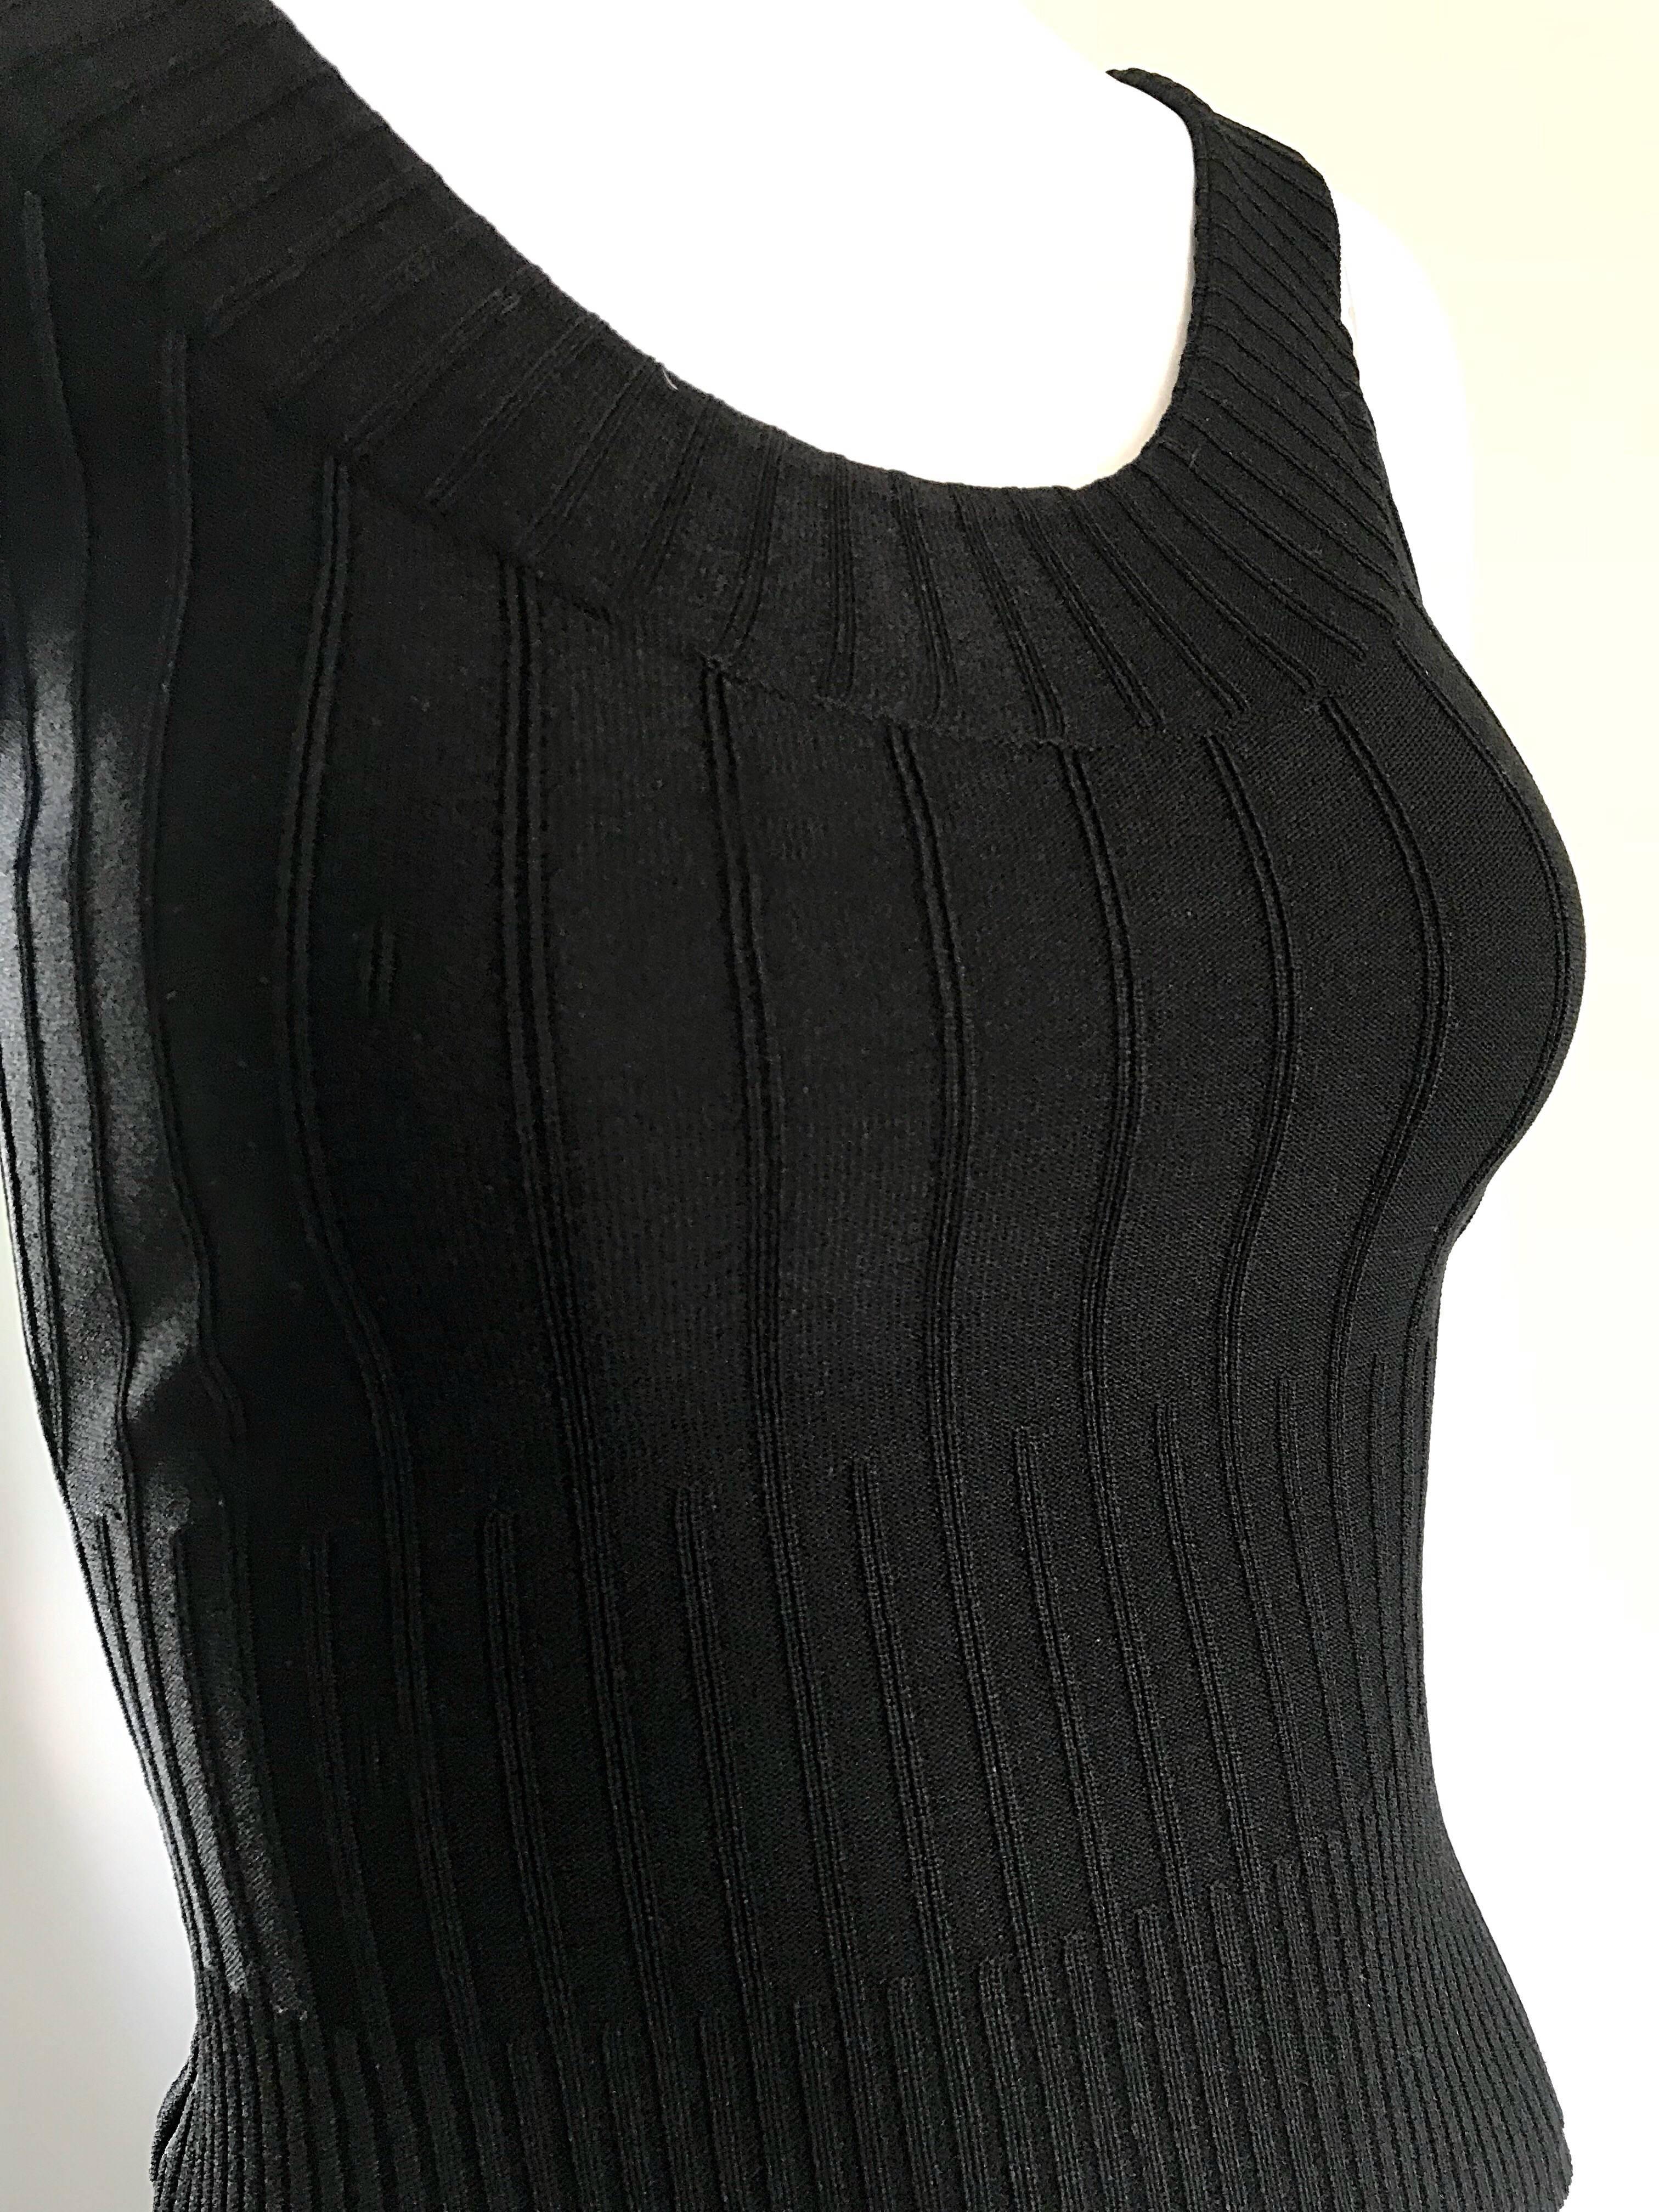 Women's Thierry Mugler Couture 1990s Black Ribbed Sleeveless Vintage 90s Crop Top Shirt For Sale